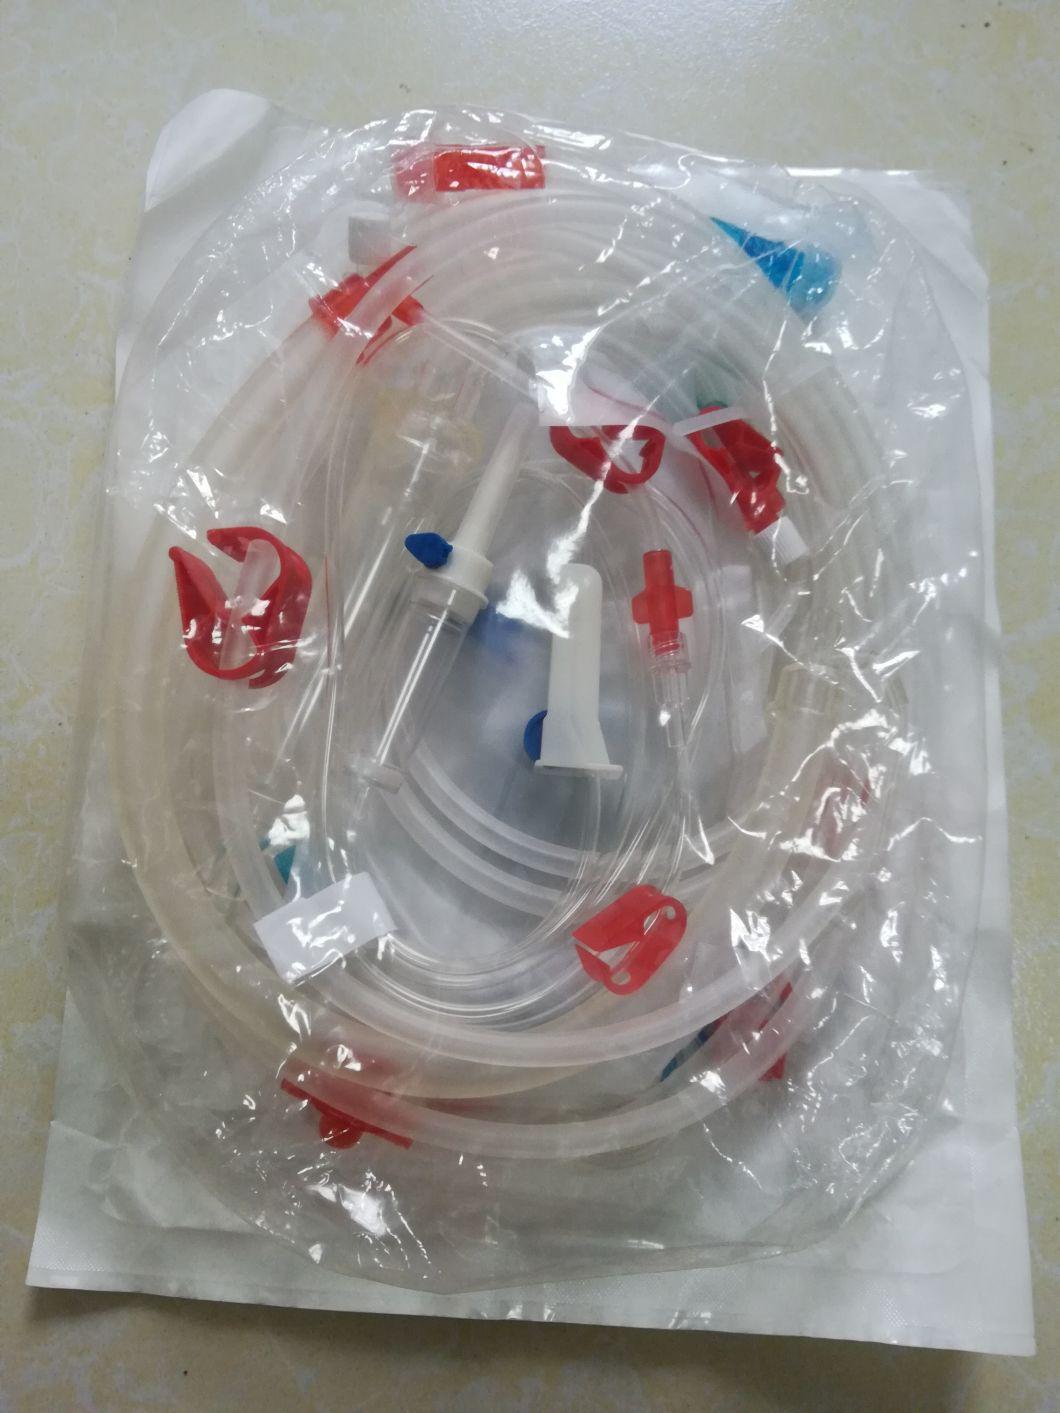 CE/FDA Certified Hemodialyser for Hematodialysis Use with Competitive Price